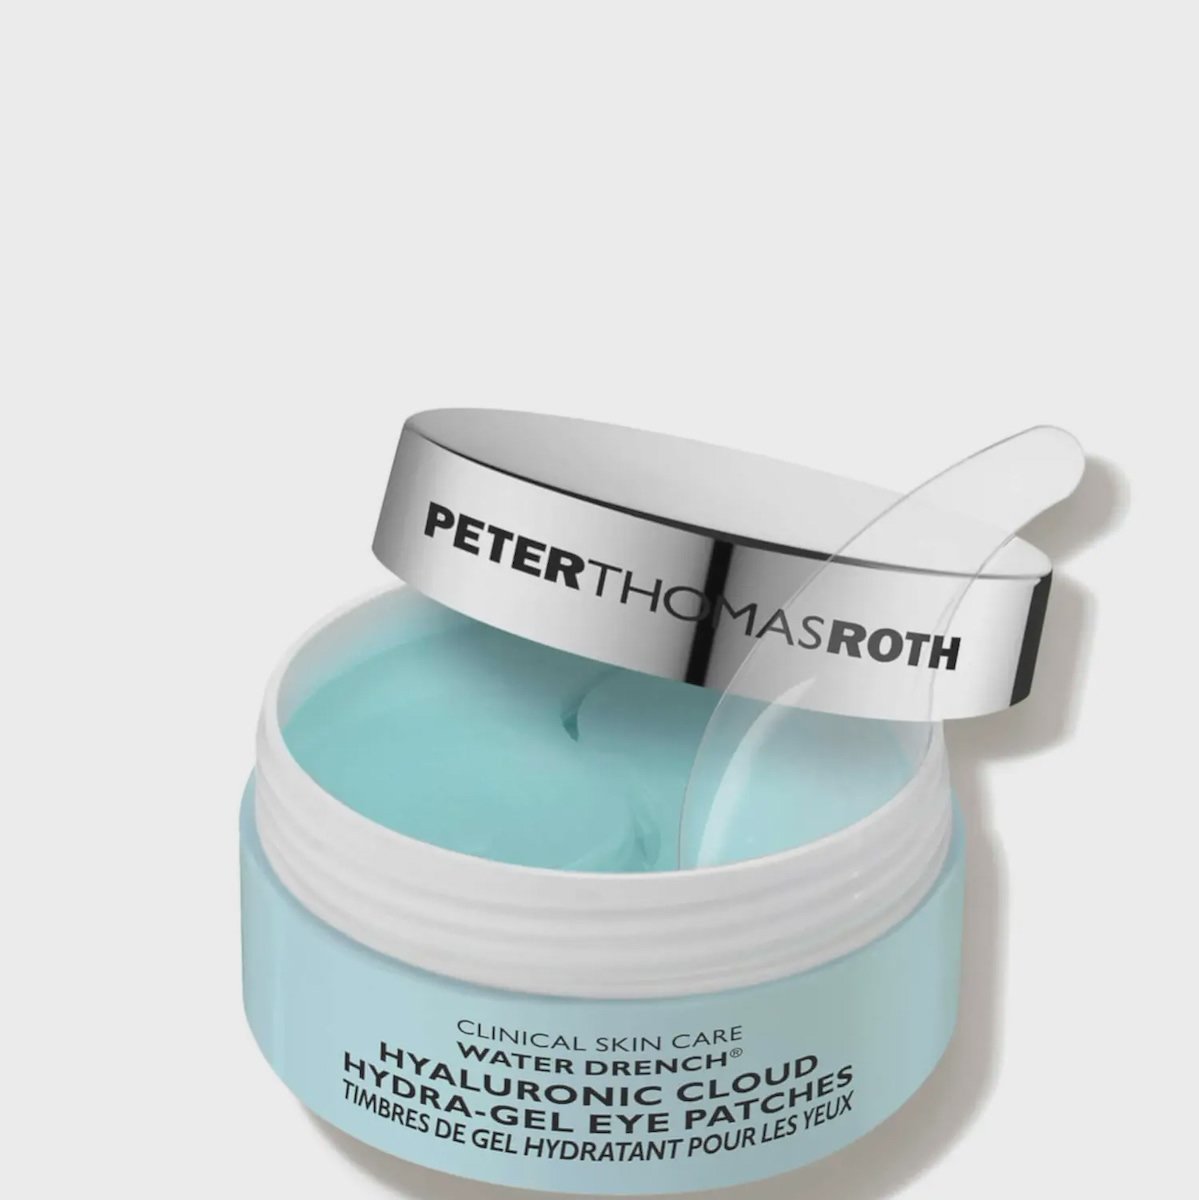 Peter Thomas Roth Hyaluronic Cloud Hydra-Gel Eye Patches $55